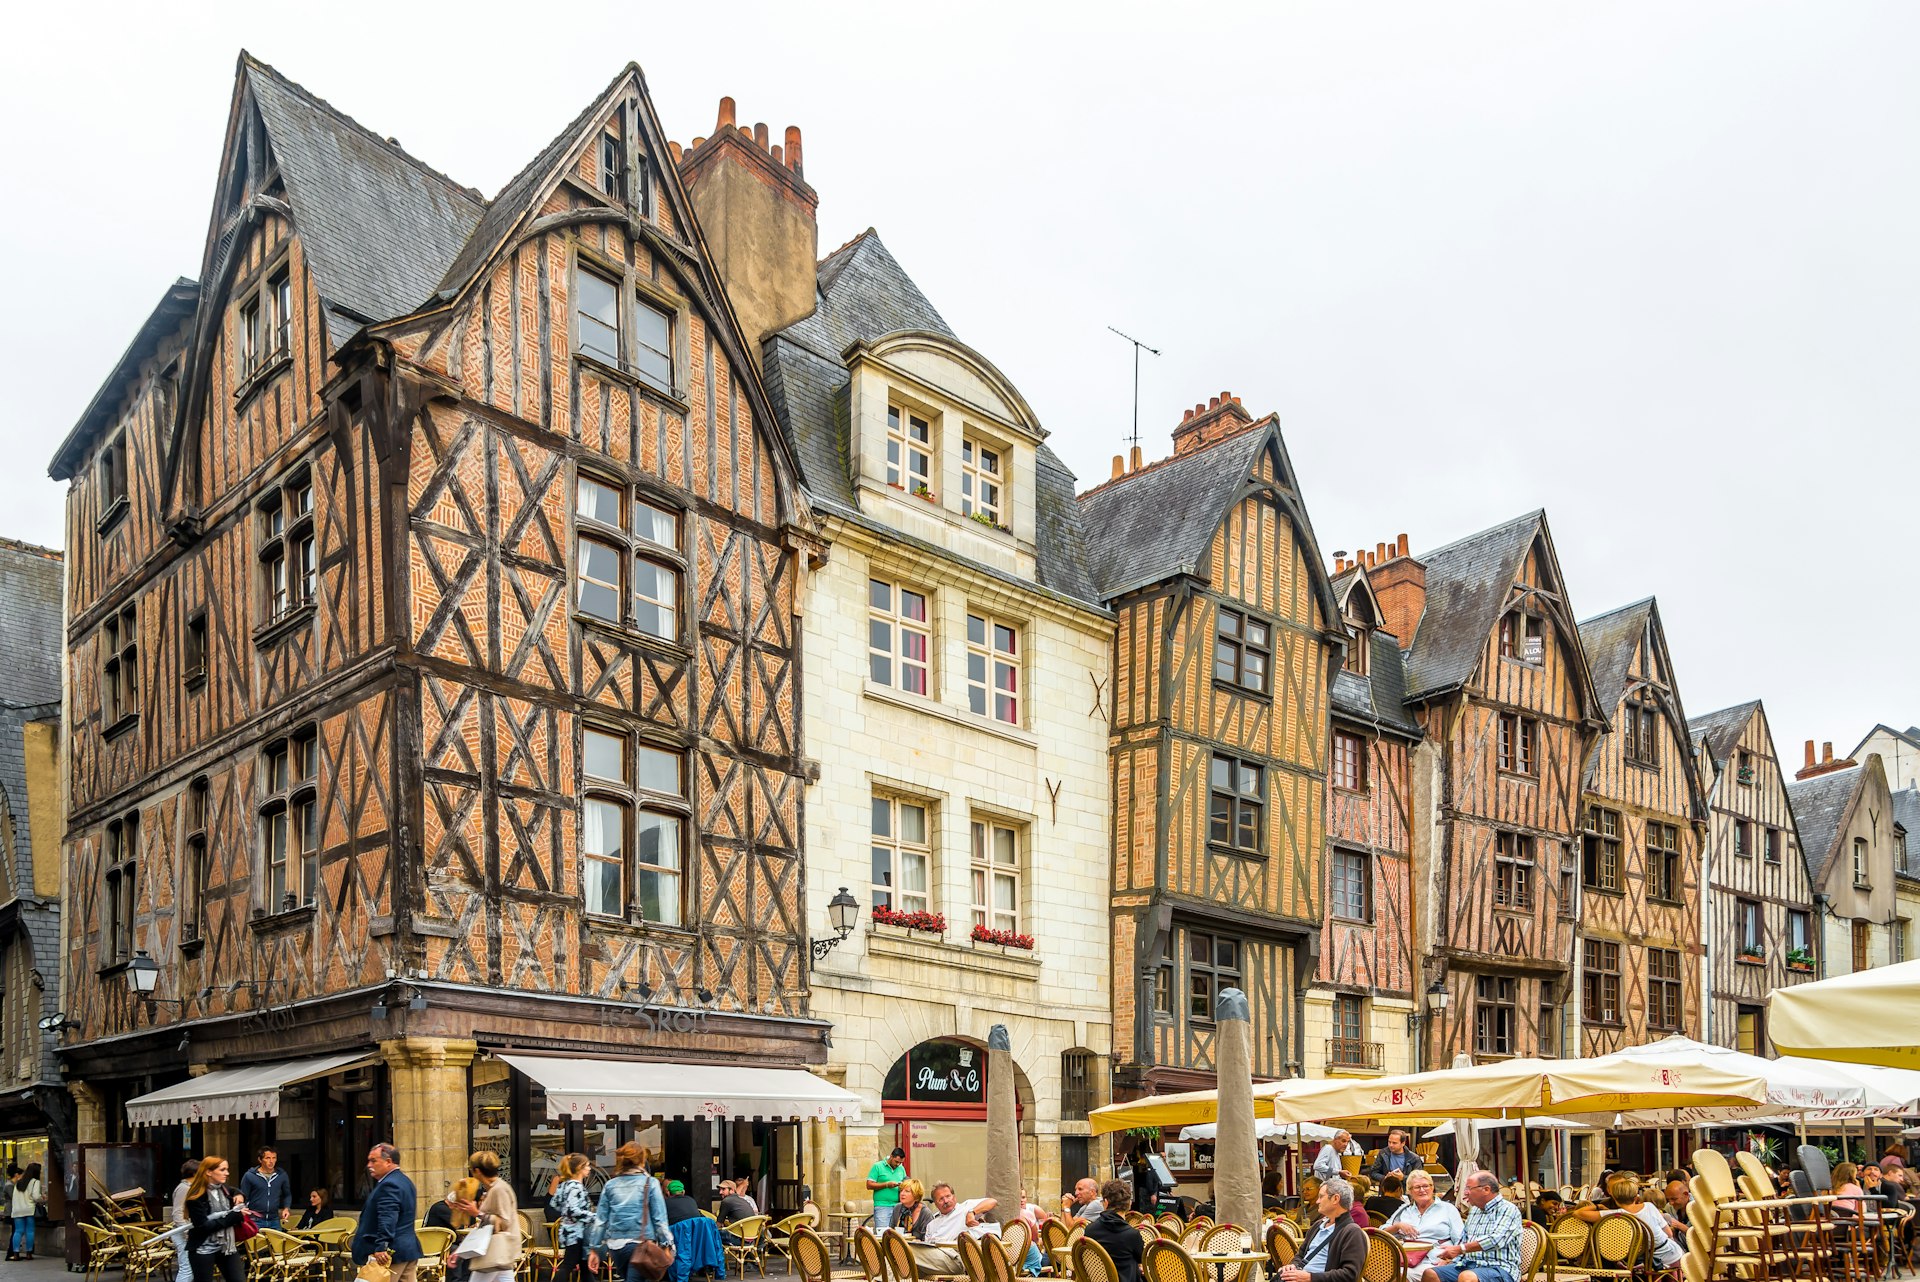 Medieval timbered houses surround a pedestrianised square